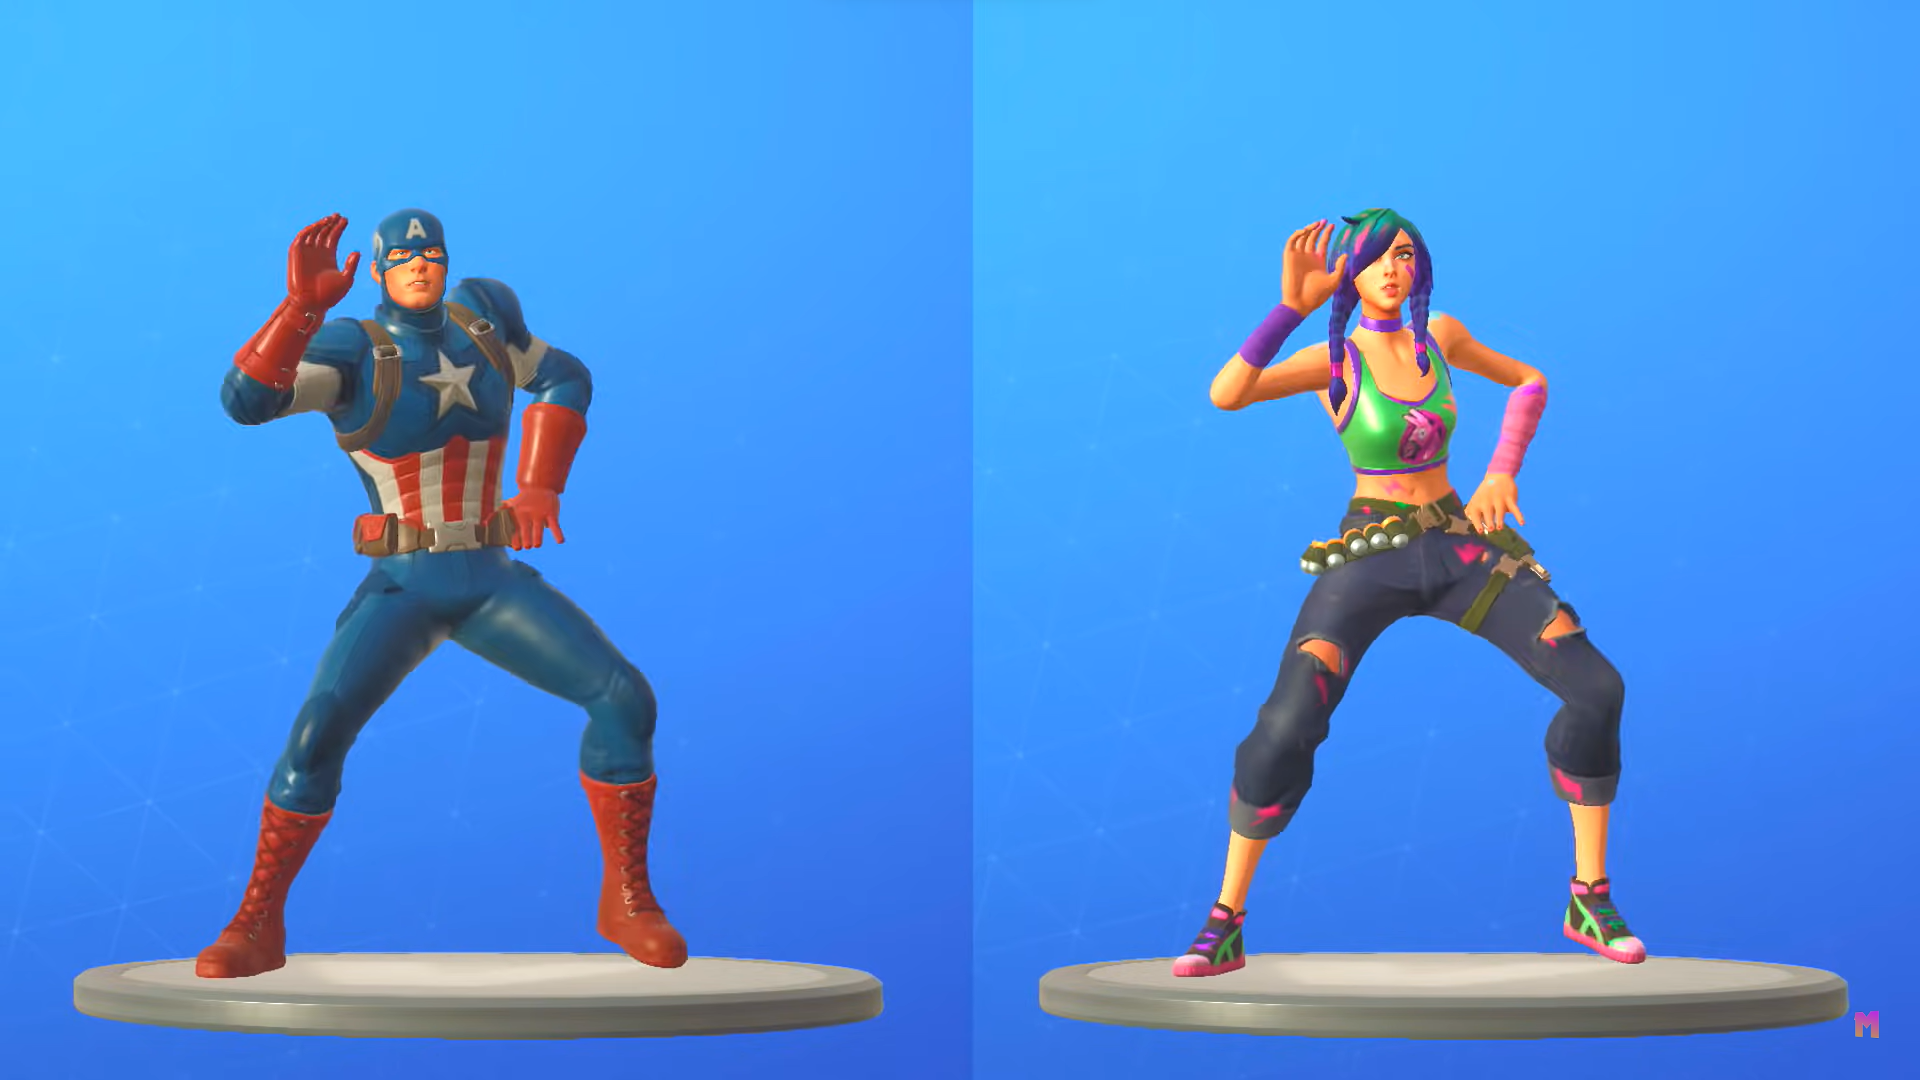 The Fortnite's Its Complicated emote seen in the dance video